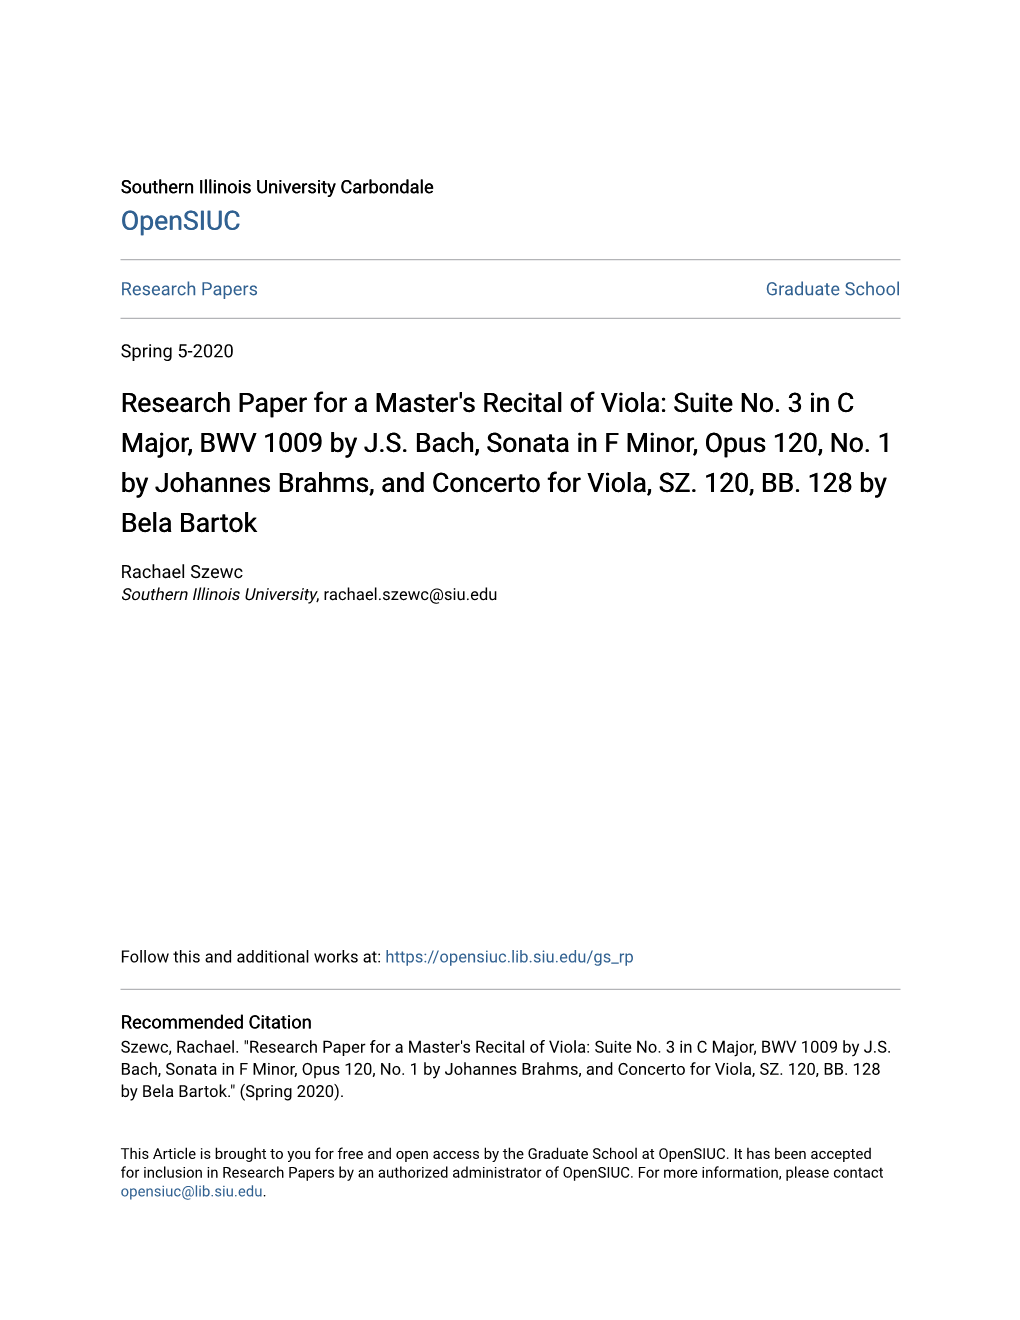 Research Paper for a Master's Recital of Viola: Suite No. 3 in C Major, BWV 1009 by J.S